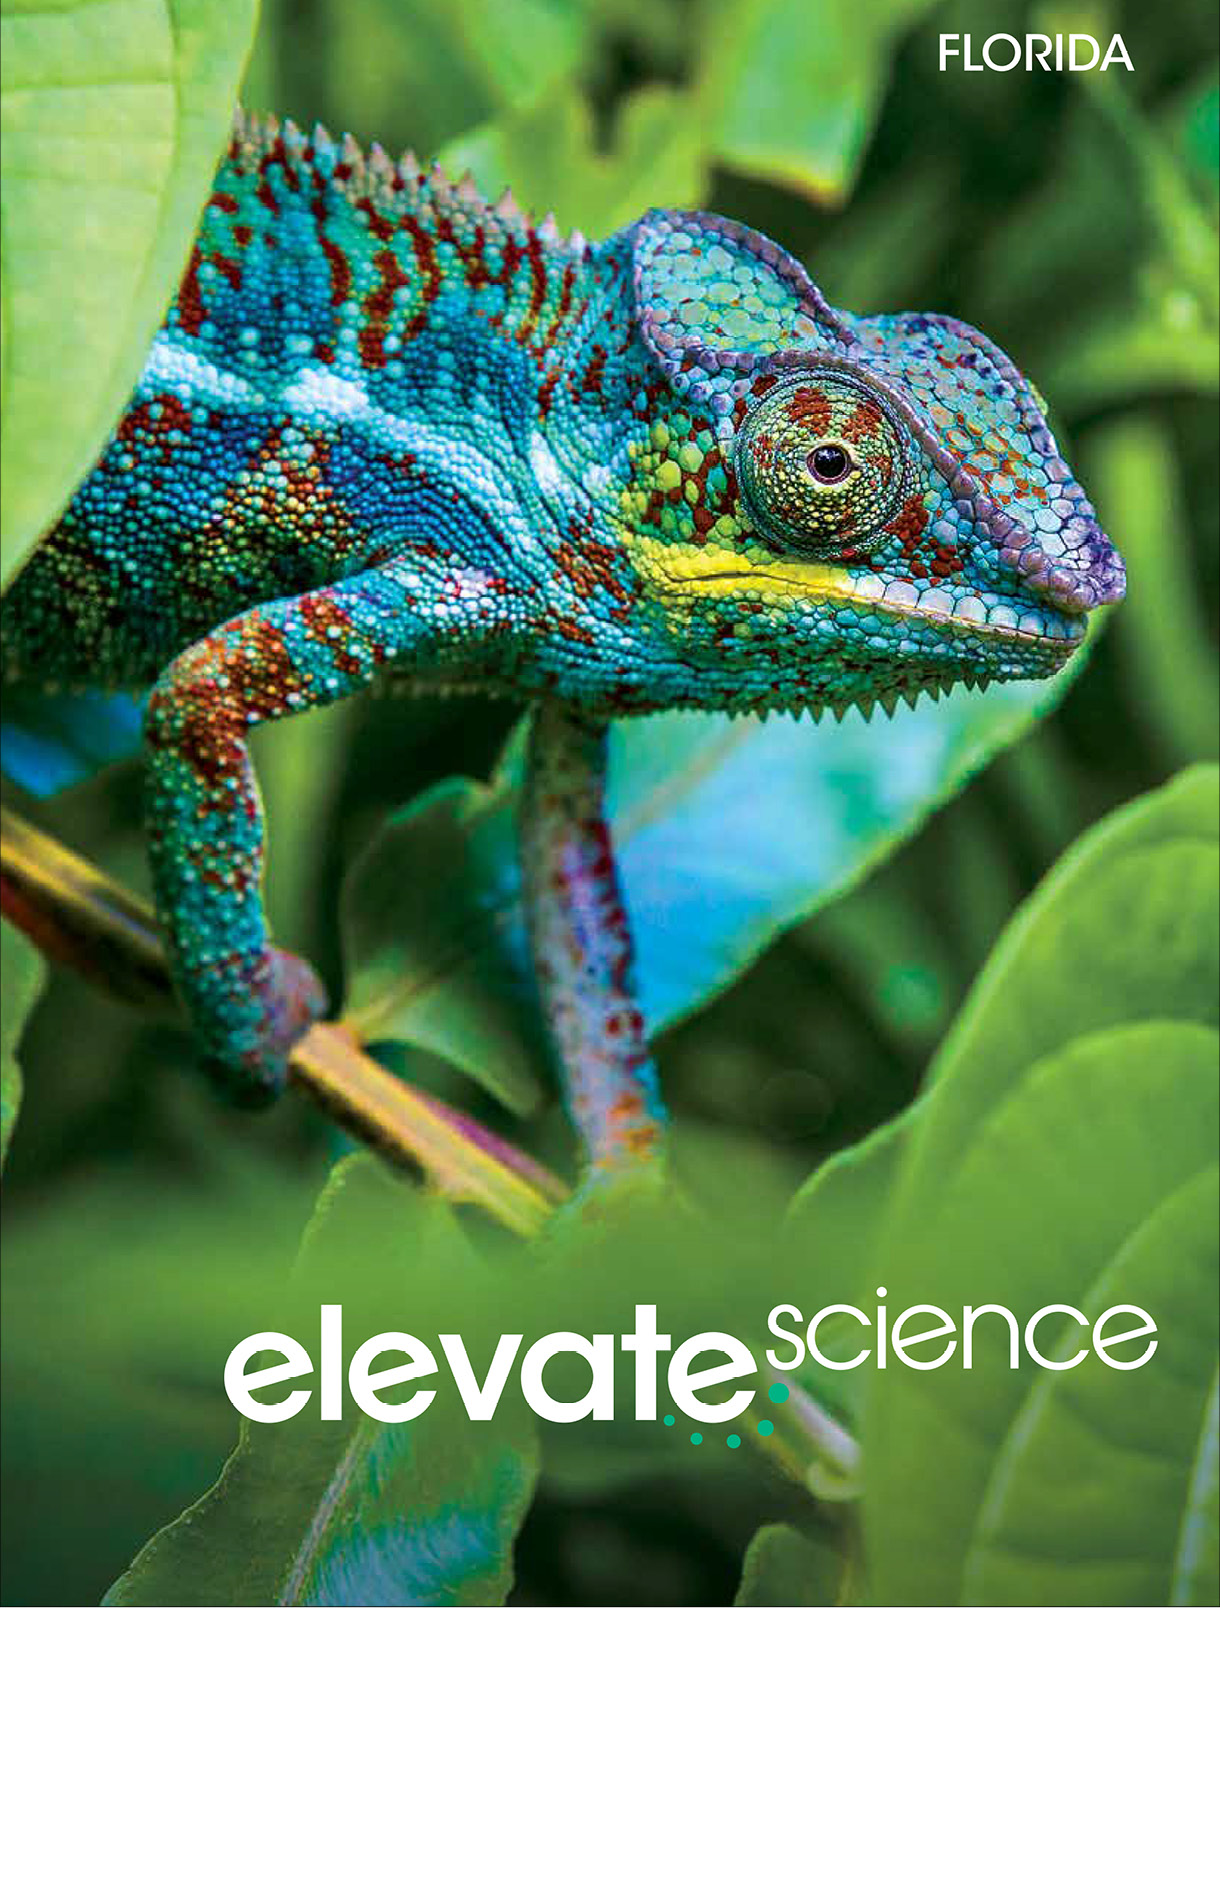 Book cover Elevate Science book. It has a blue iguana crawling through leaves.